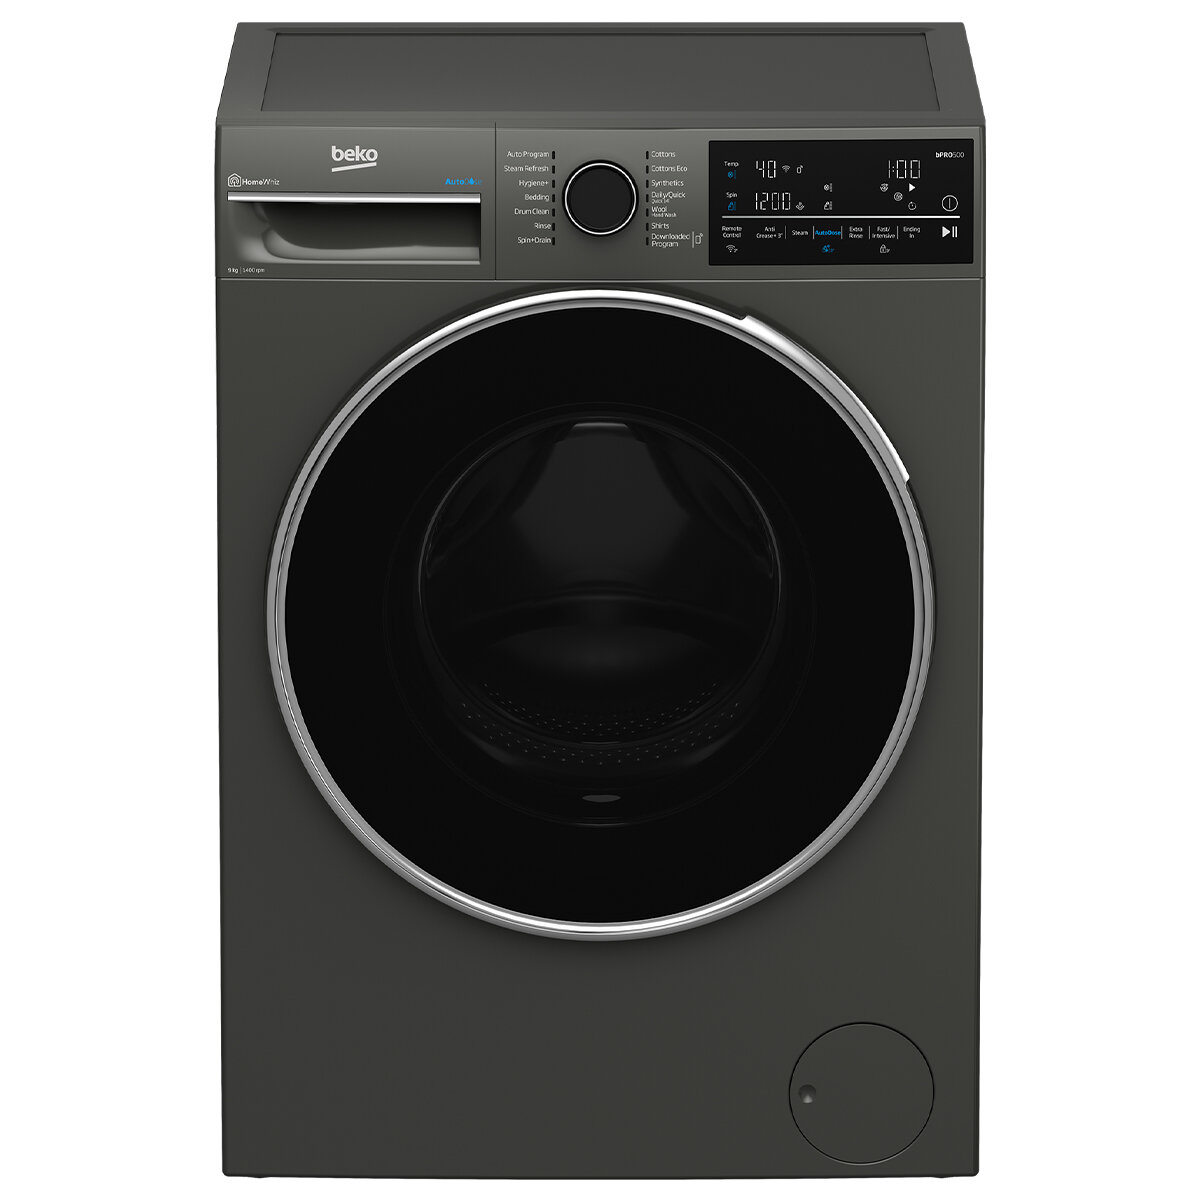 Beko 9kg Front Load Washing Machine Graphite with Steam and WiFi BFLB904ADG